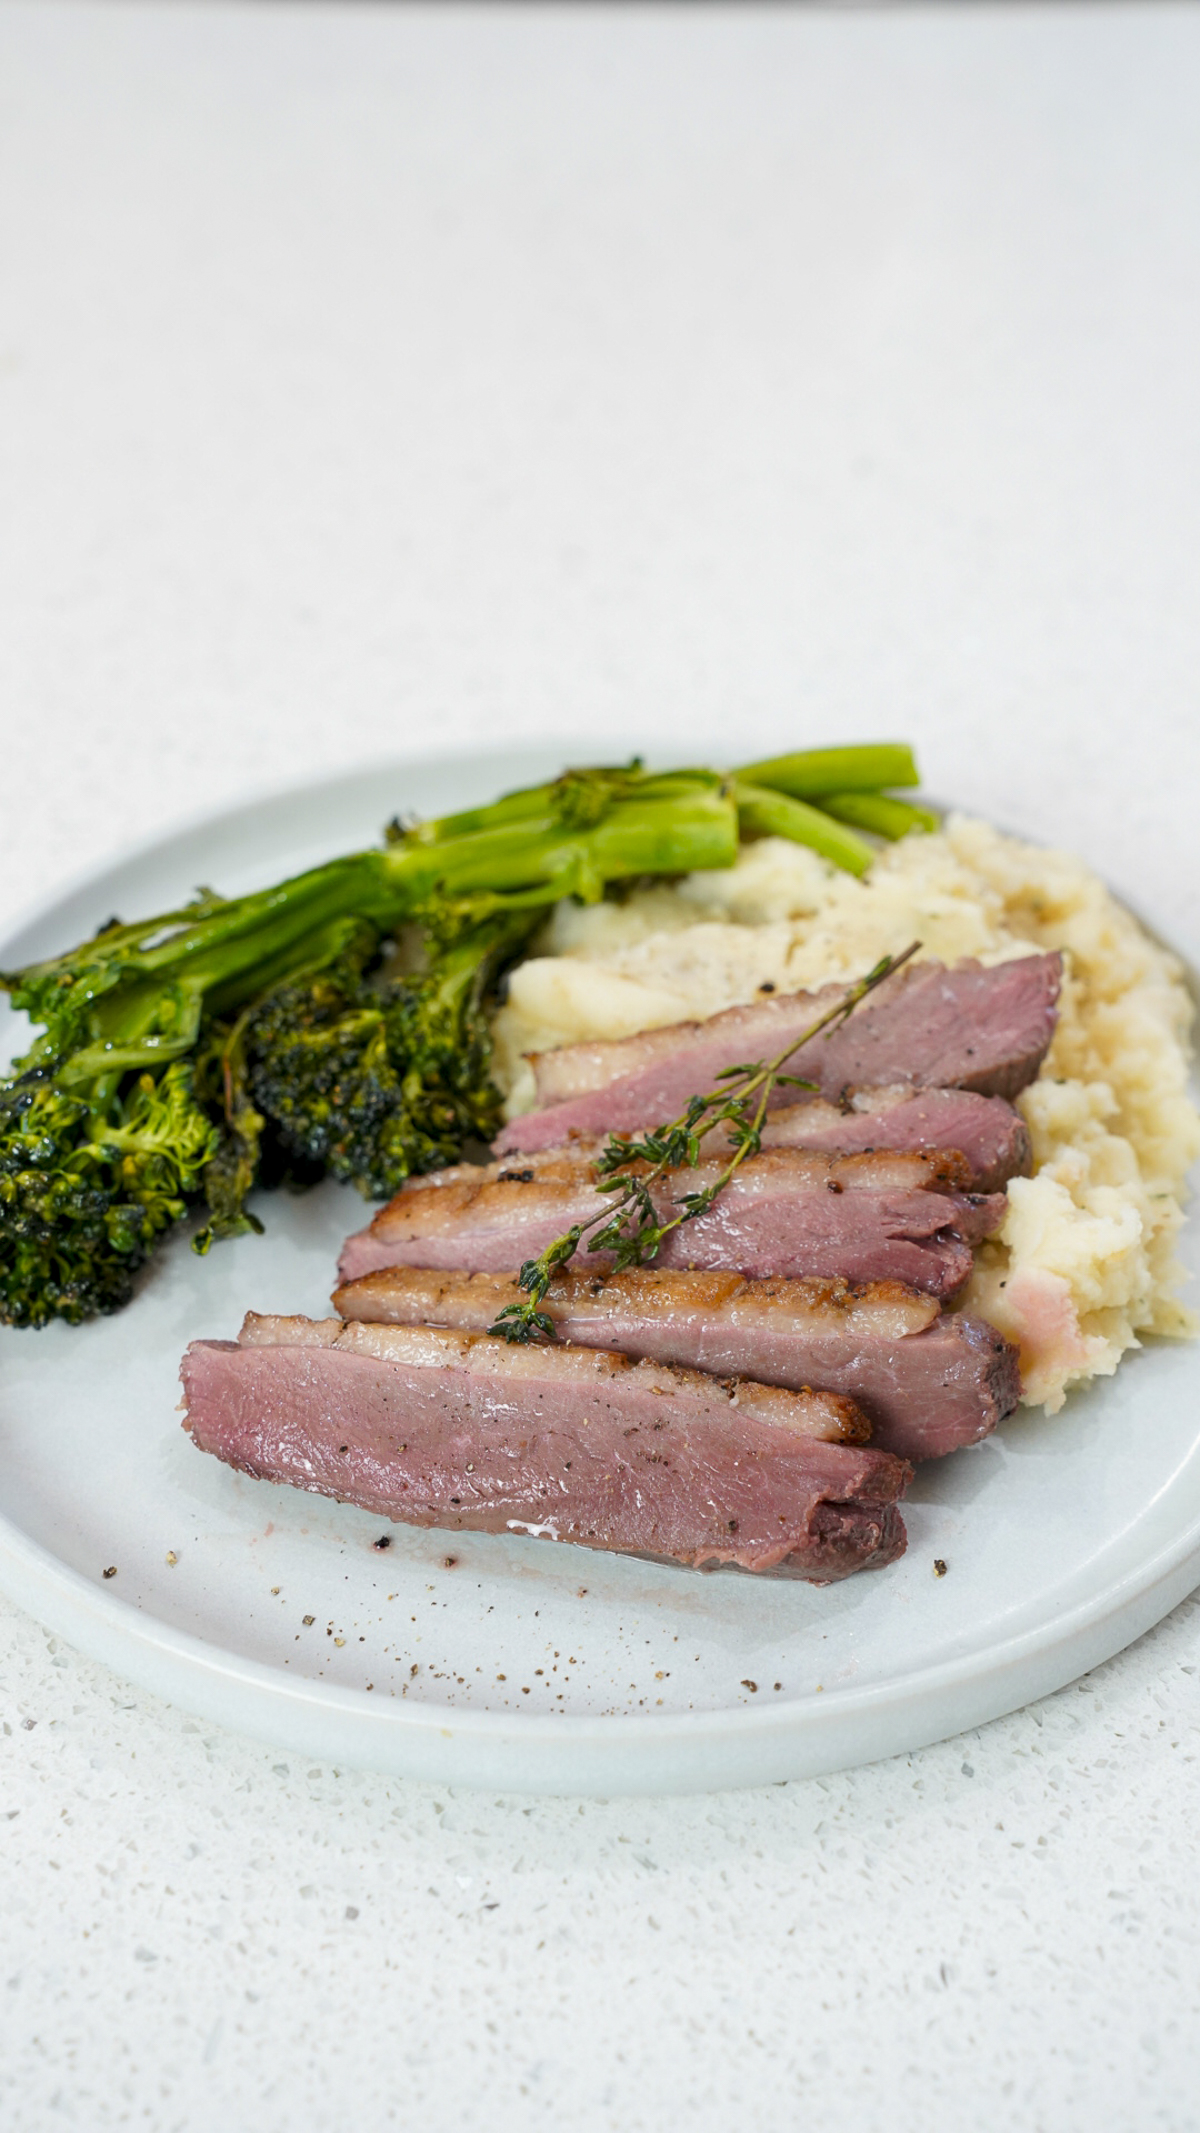 Juicy sous vide duck breast with crispy skin on a plate with mashed potatoes and broccolini.